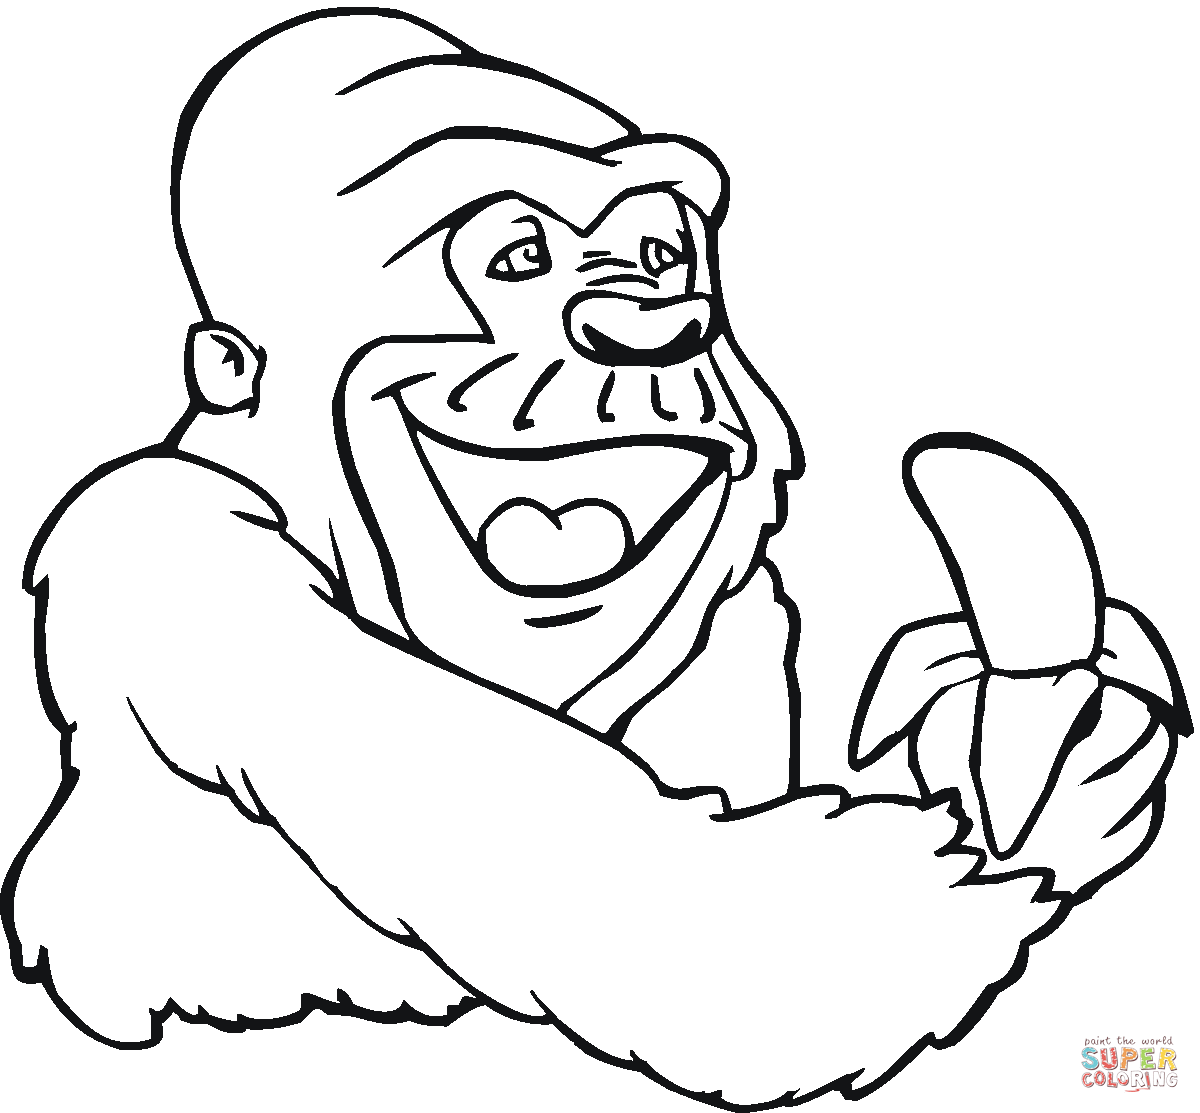 Free Cute Gorilla Coloring Pages, Download Free Cute Gorilla Coloring